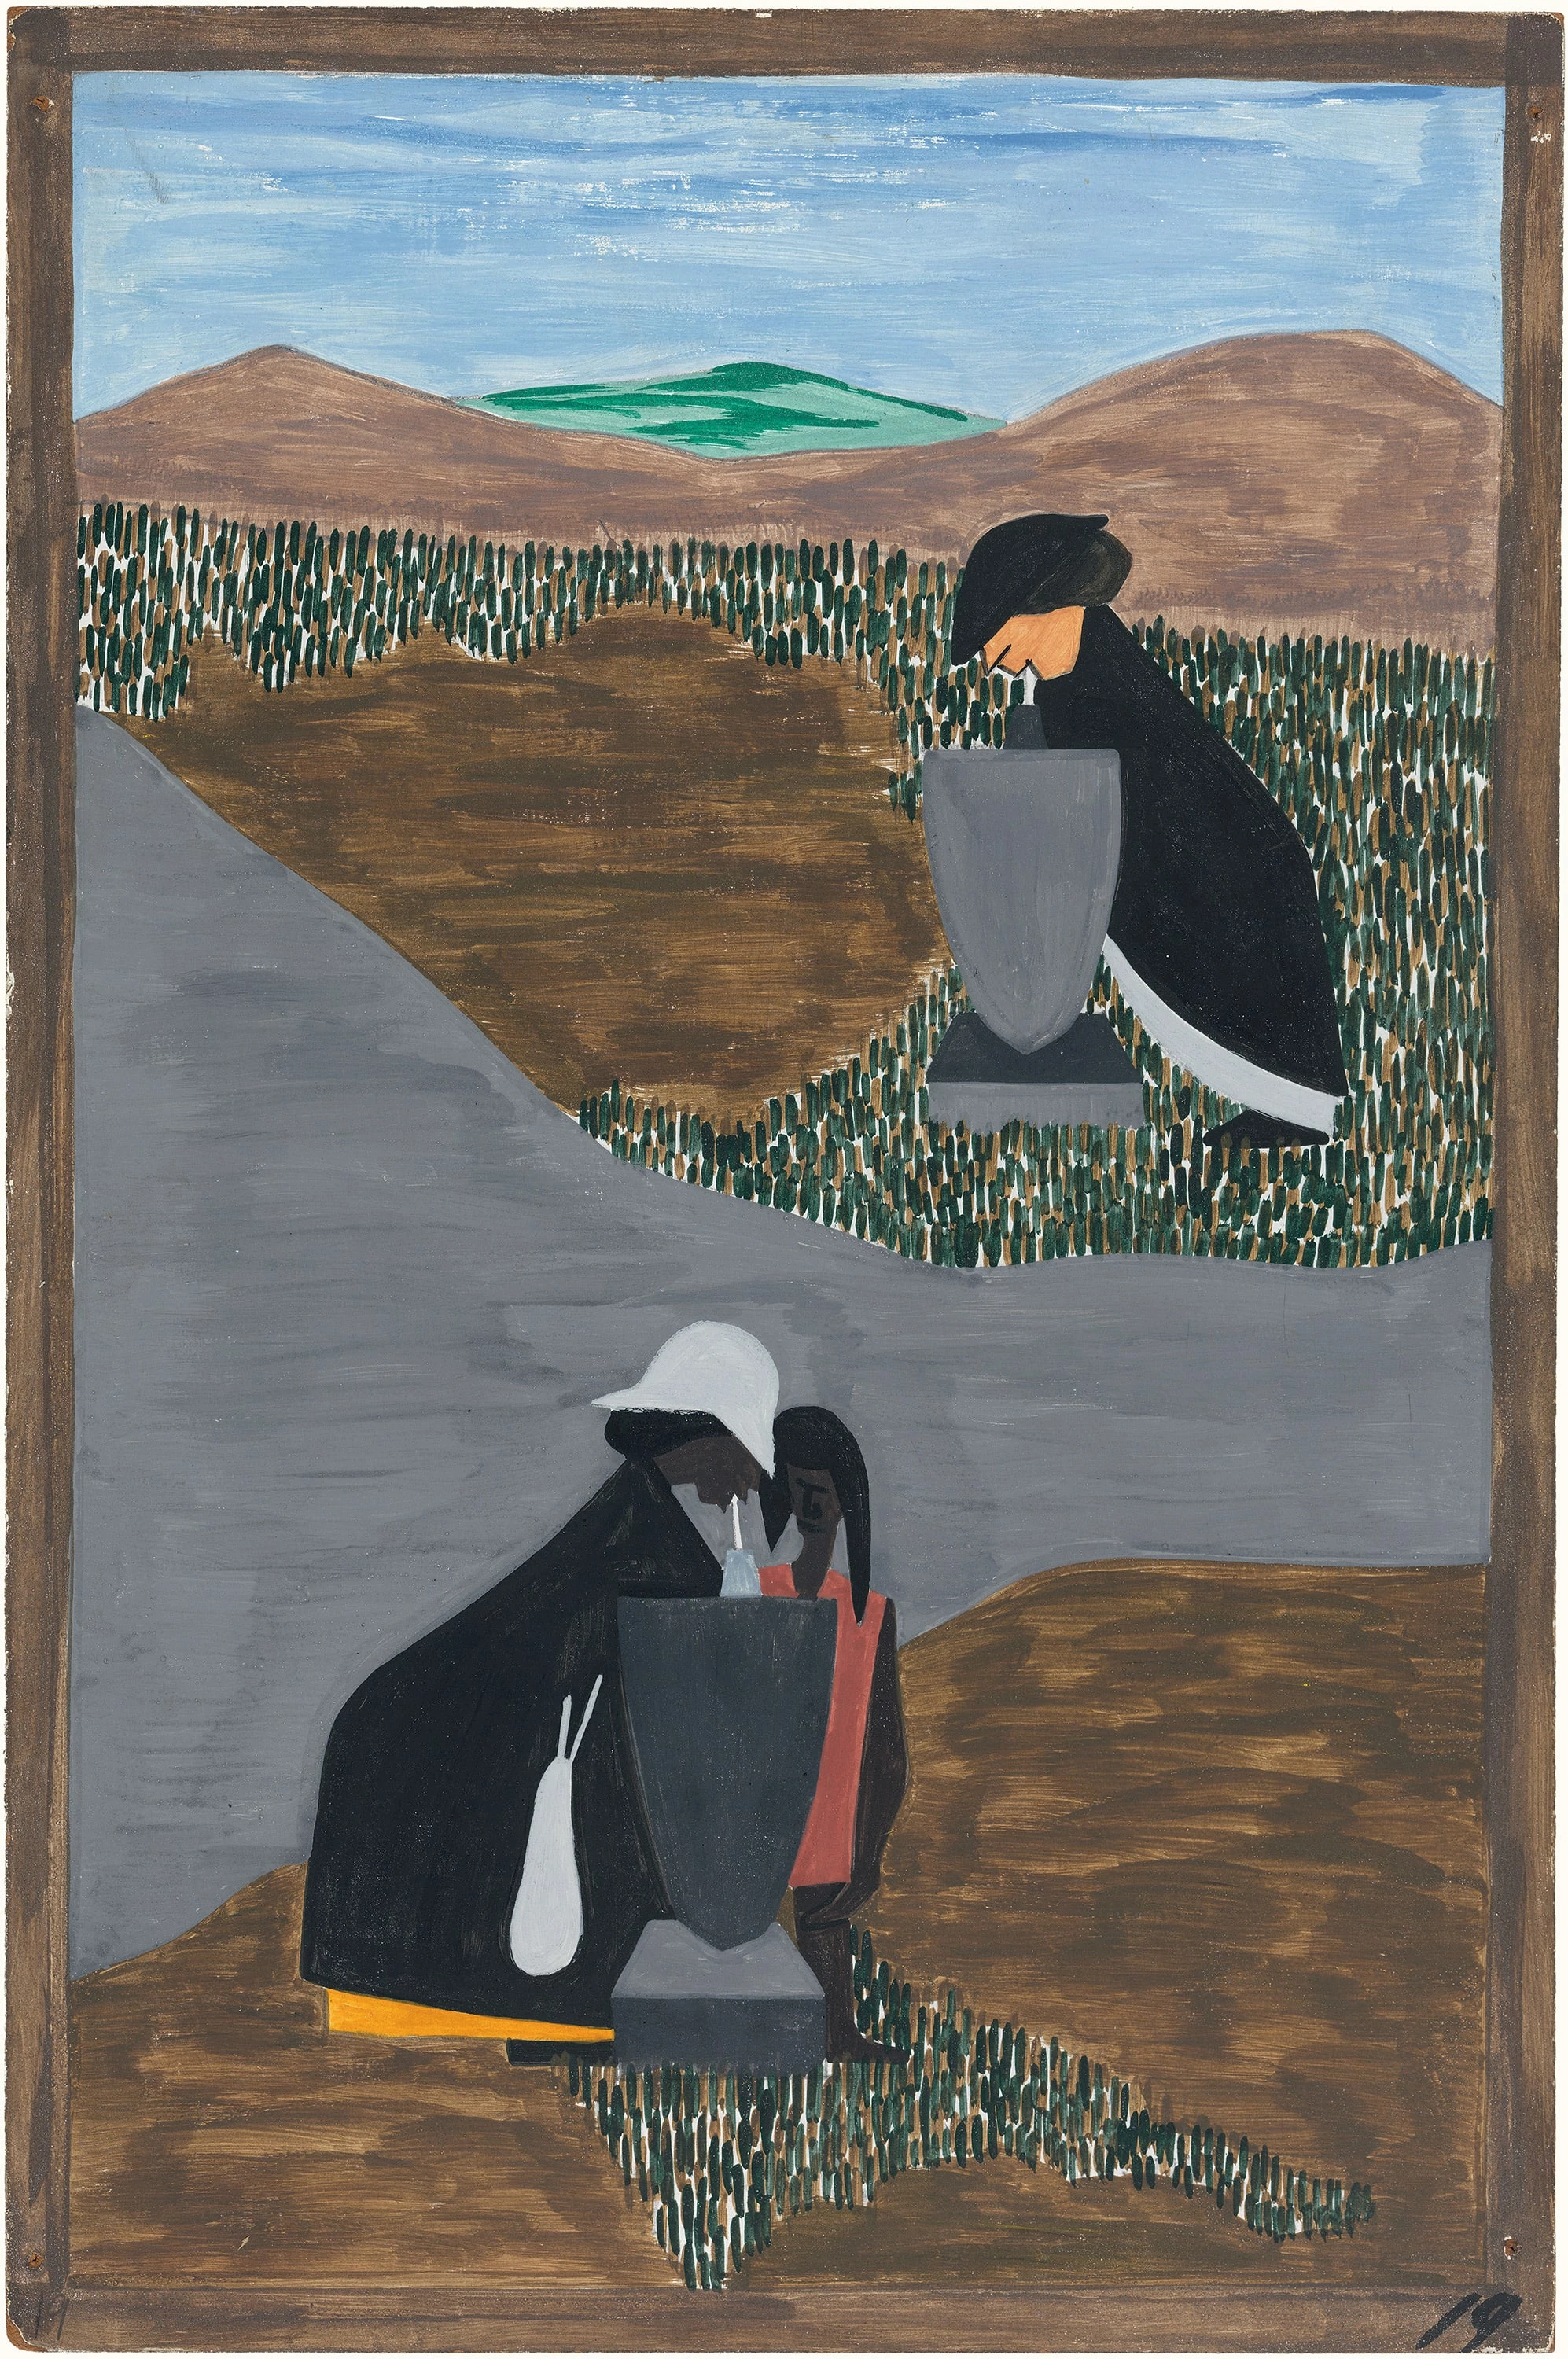 Migration Series No.19: There had always been discrimination, Jacob Lawrence